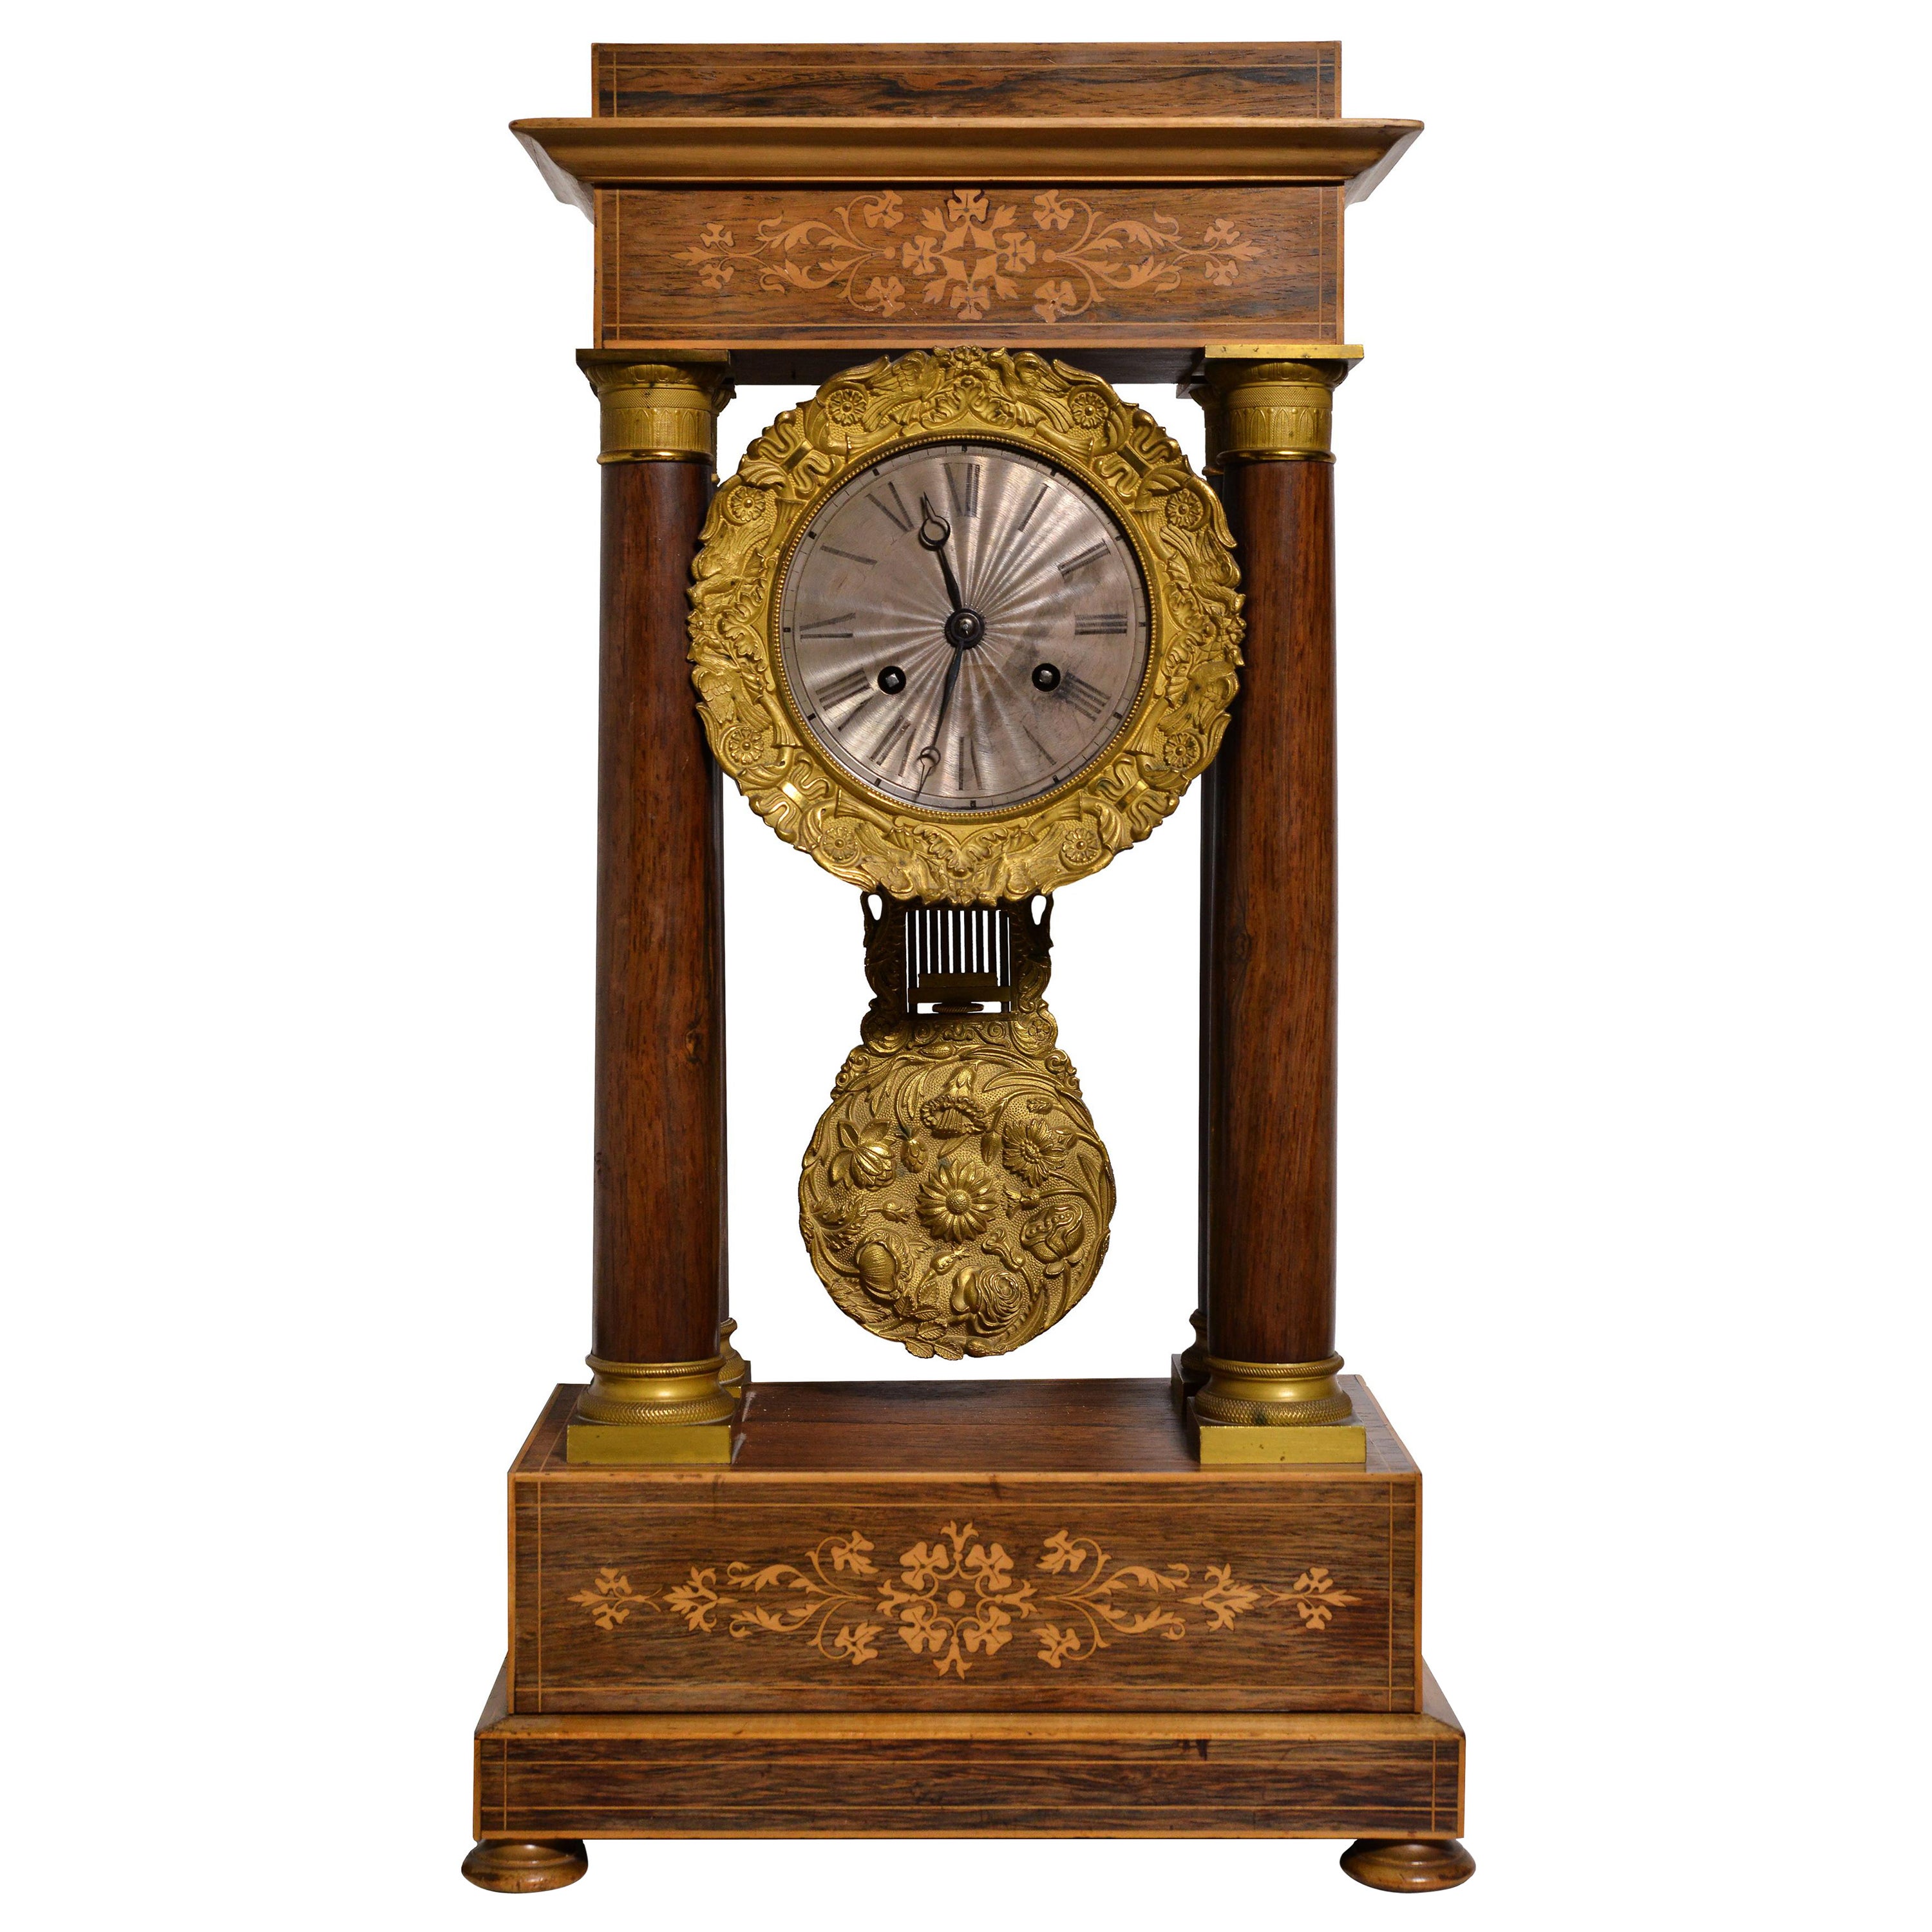 French Portico clock Rosewood n Marquetry early 19th century Gilt n Silverplated